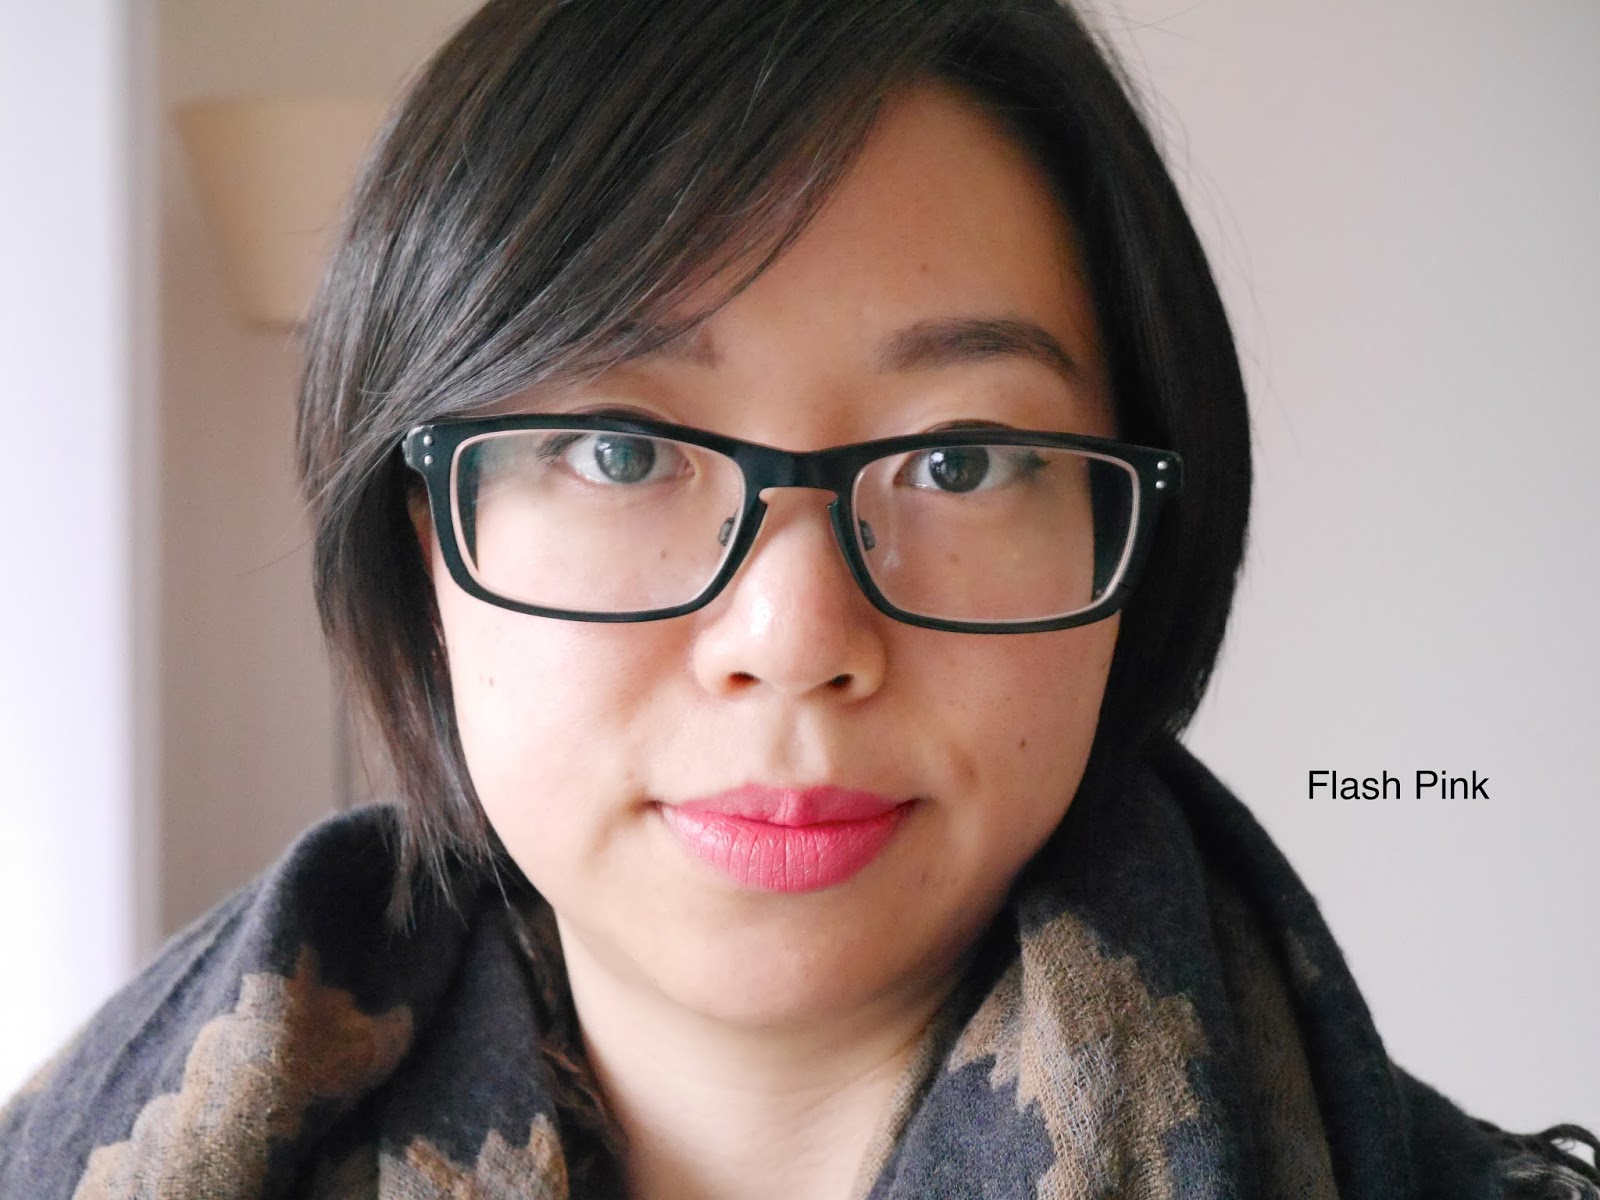 laneige serum intense lipstick twinkle coral flash pink swatch review